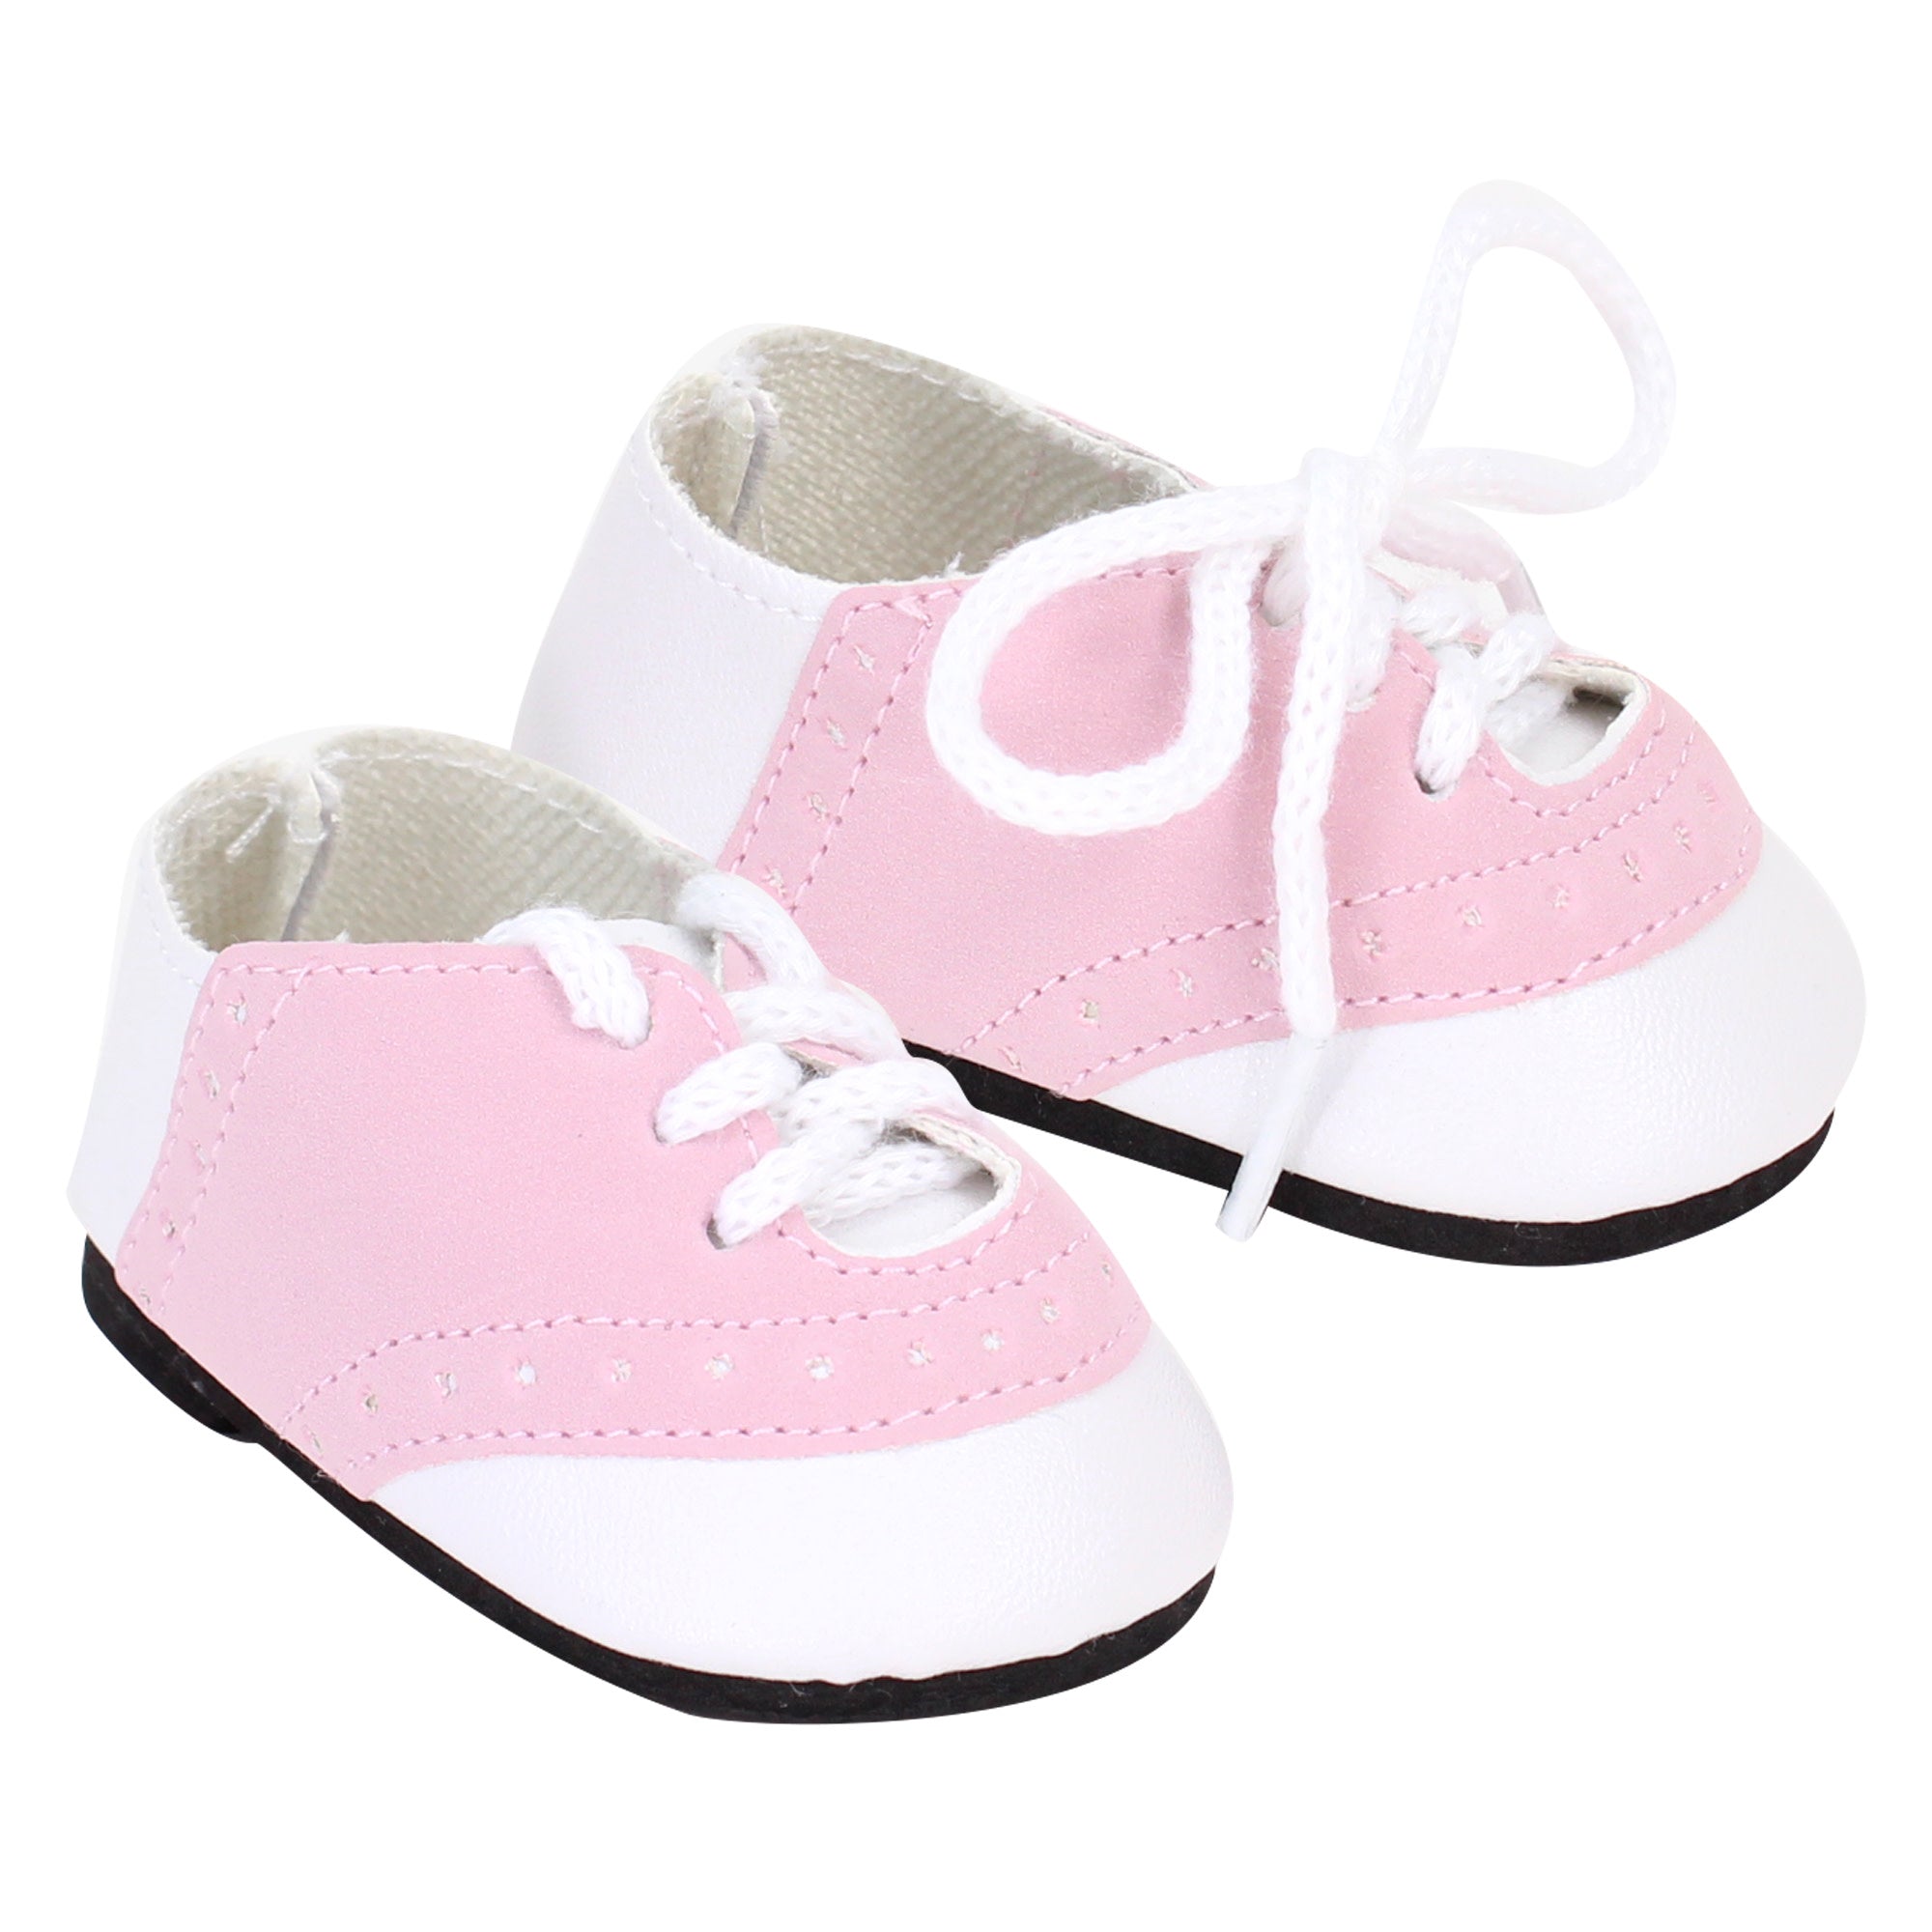 Sophia’s Super-Cute Mix & Match Classic Suede Lace-Up Saddle Shoes for 18” Dolls, Light Pink/White